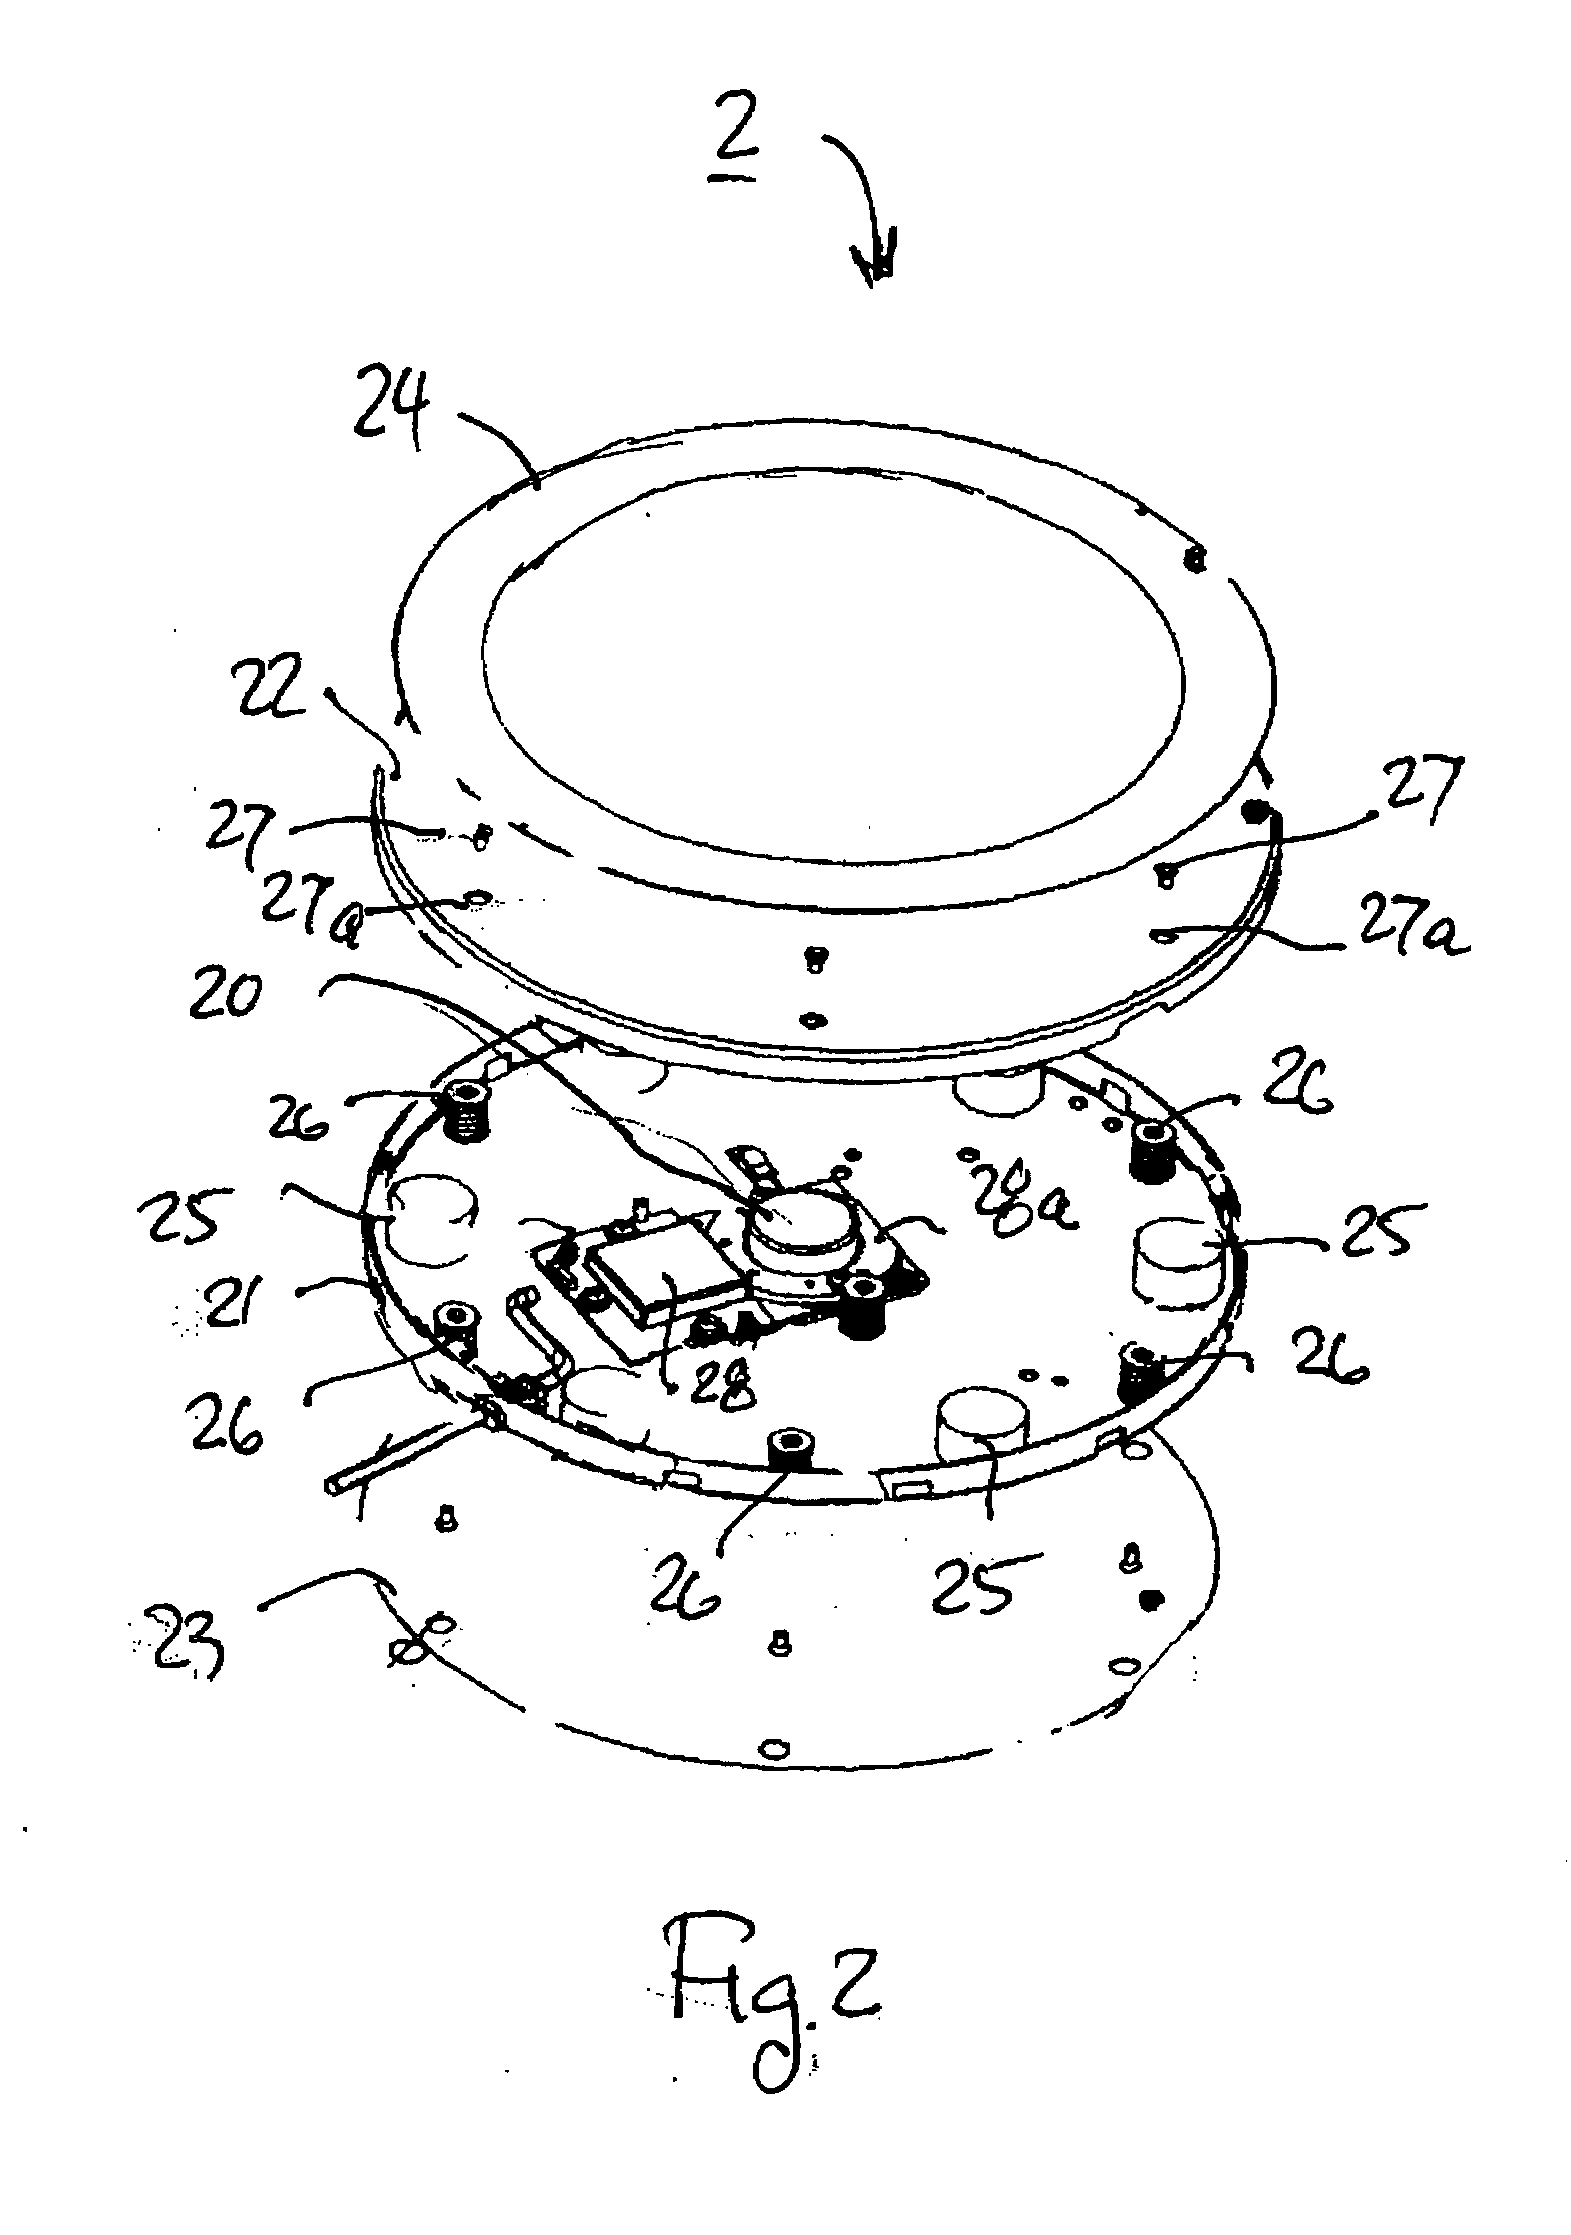 Apparatus for use in controlling snoring and sensor unit particularly useful therein